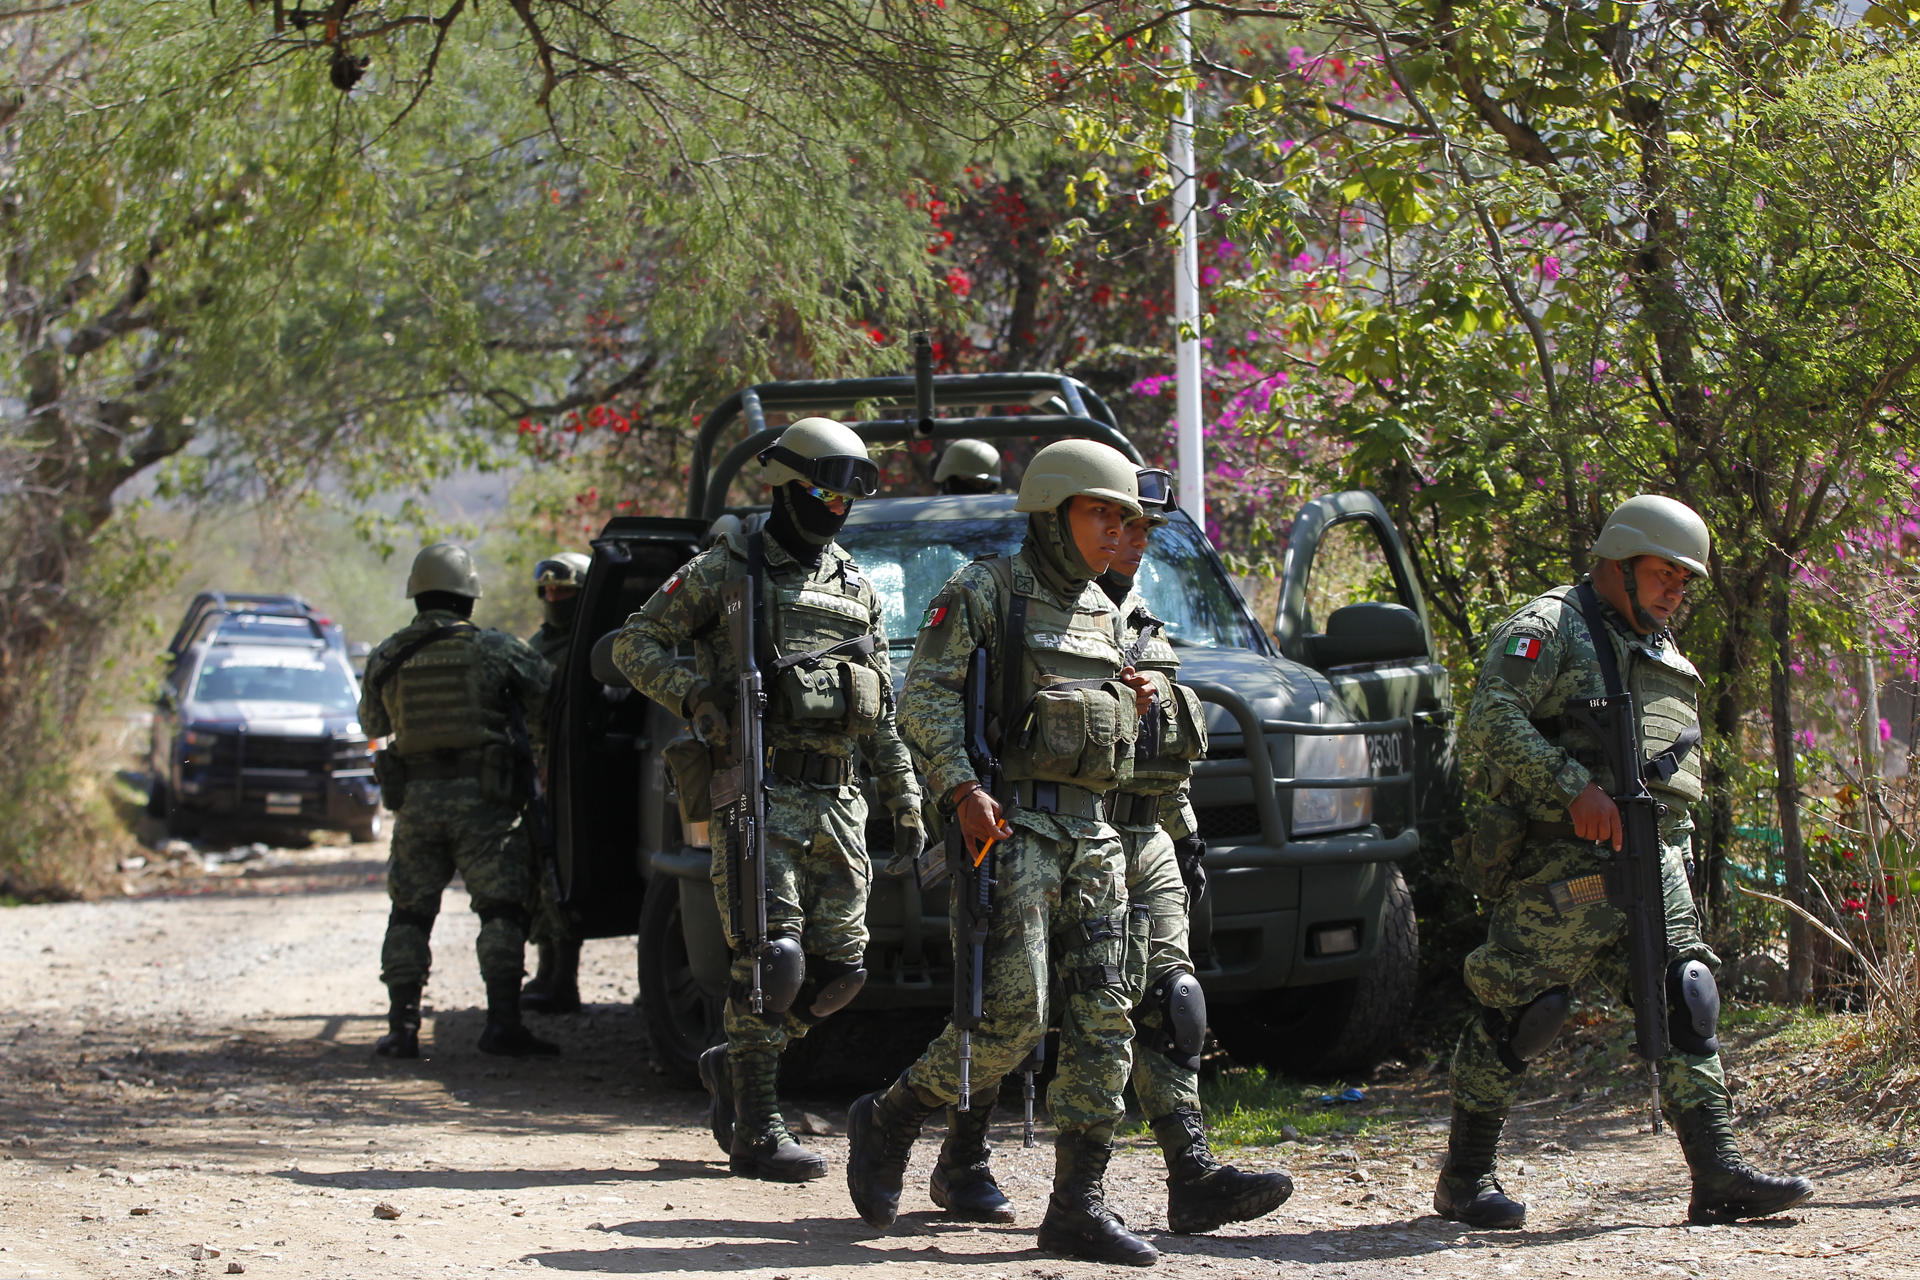 Soldiers help secure the crime scene in Tlajomulco, Mexico, on 12 July 2023, following an attack with explosives that left six police dead and 12 wounded. EFE/Francisco Guasco
